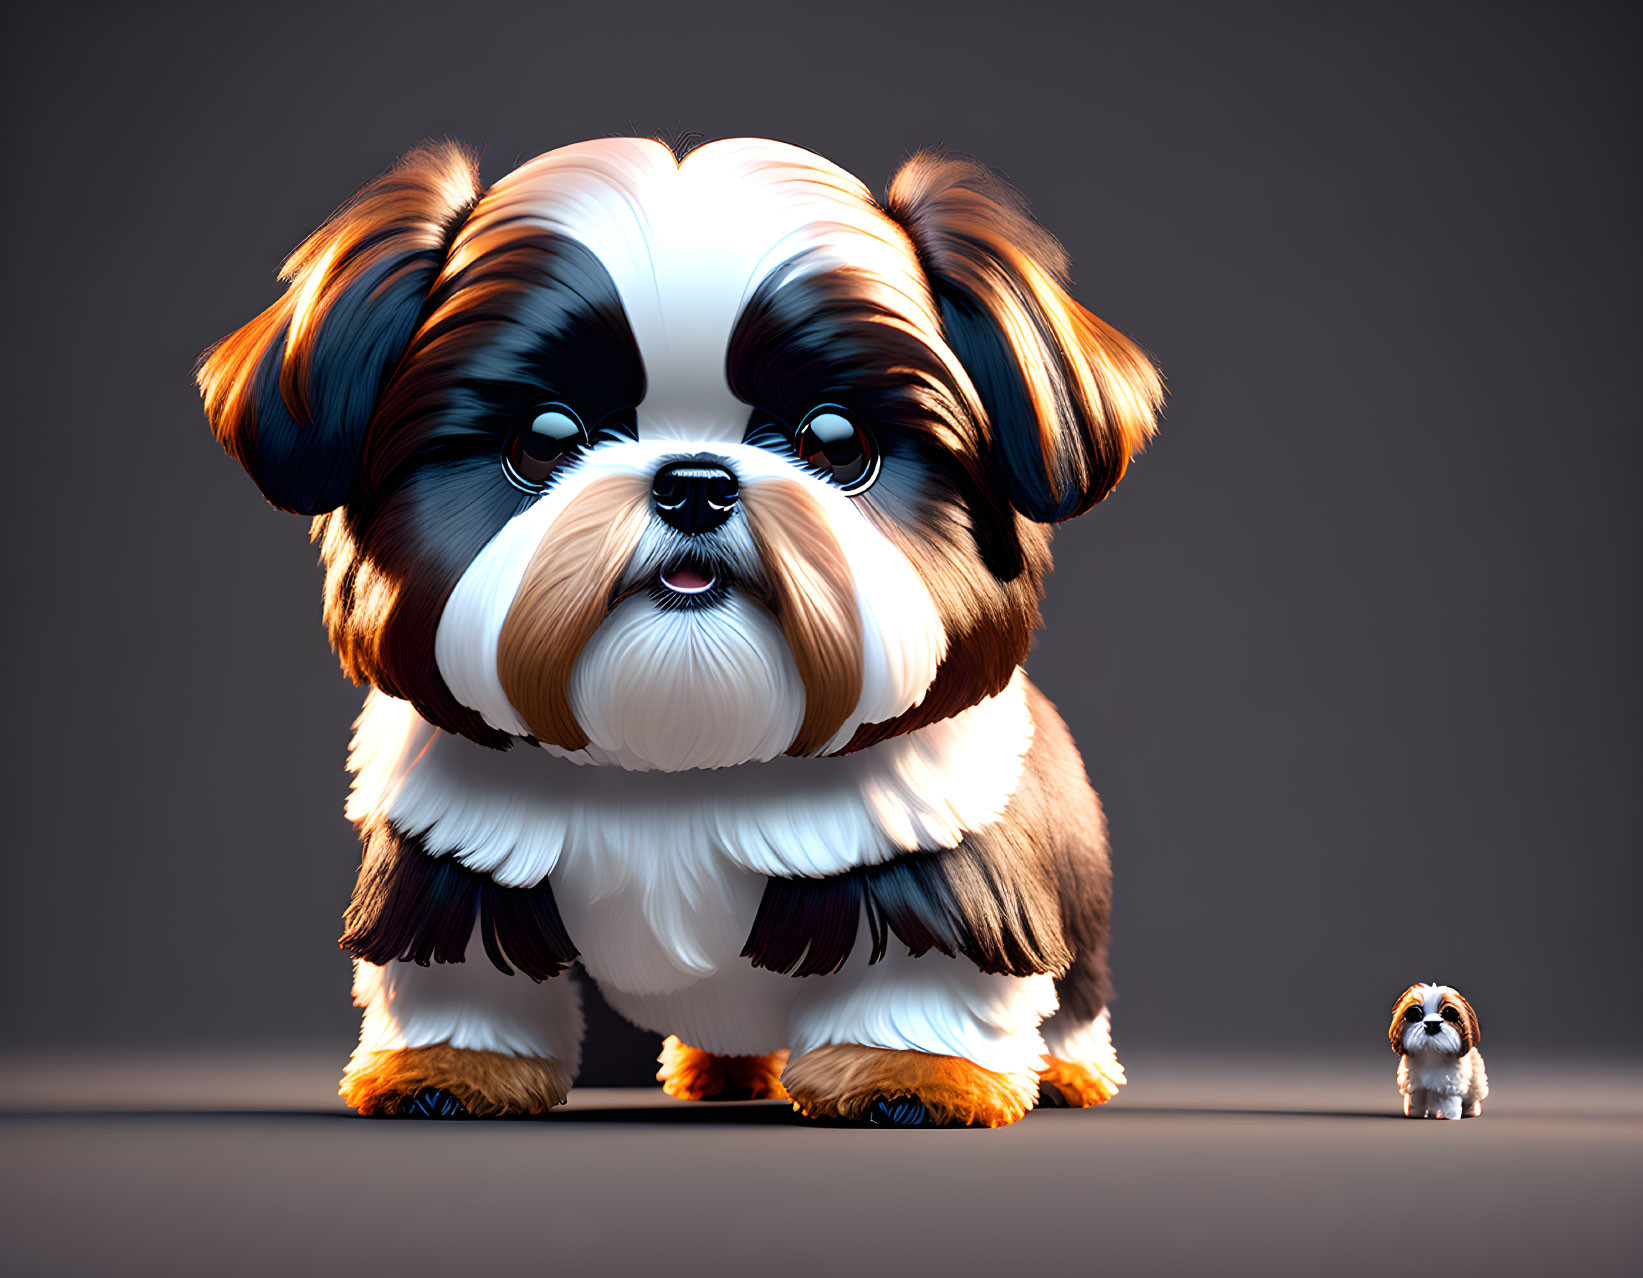 Large Fluffy Brown and White Dog with Miniature Version in Stylized Image